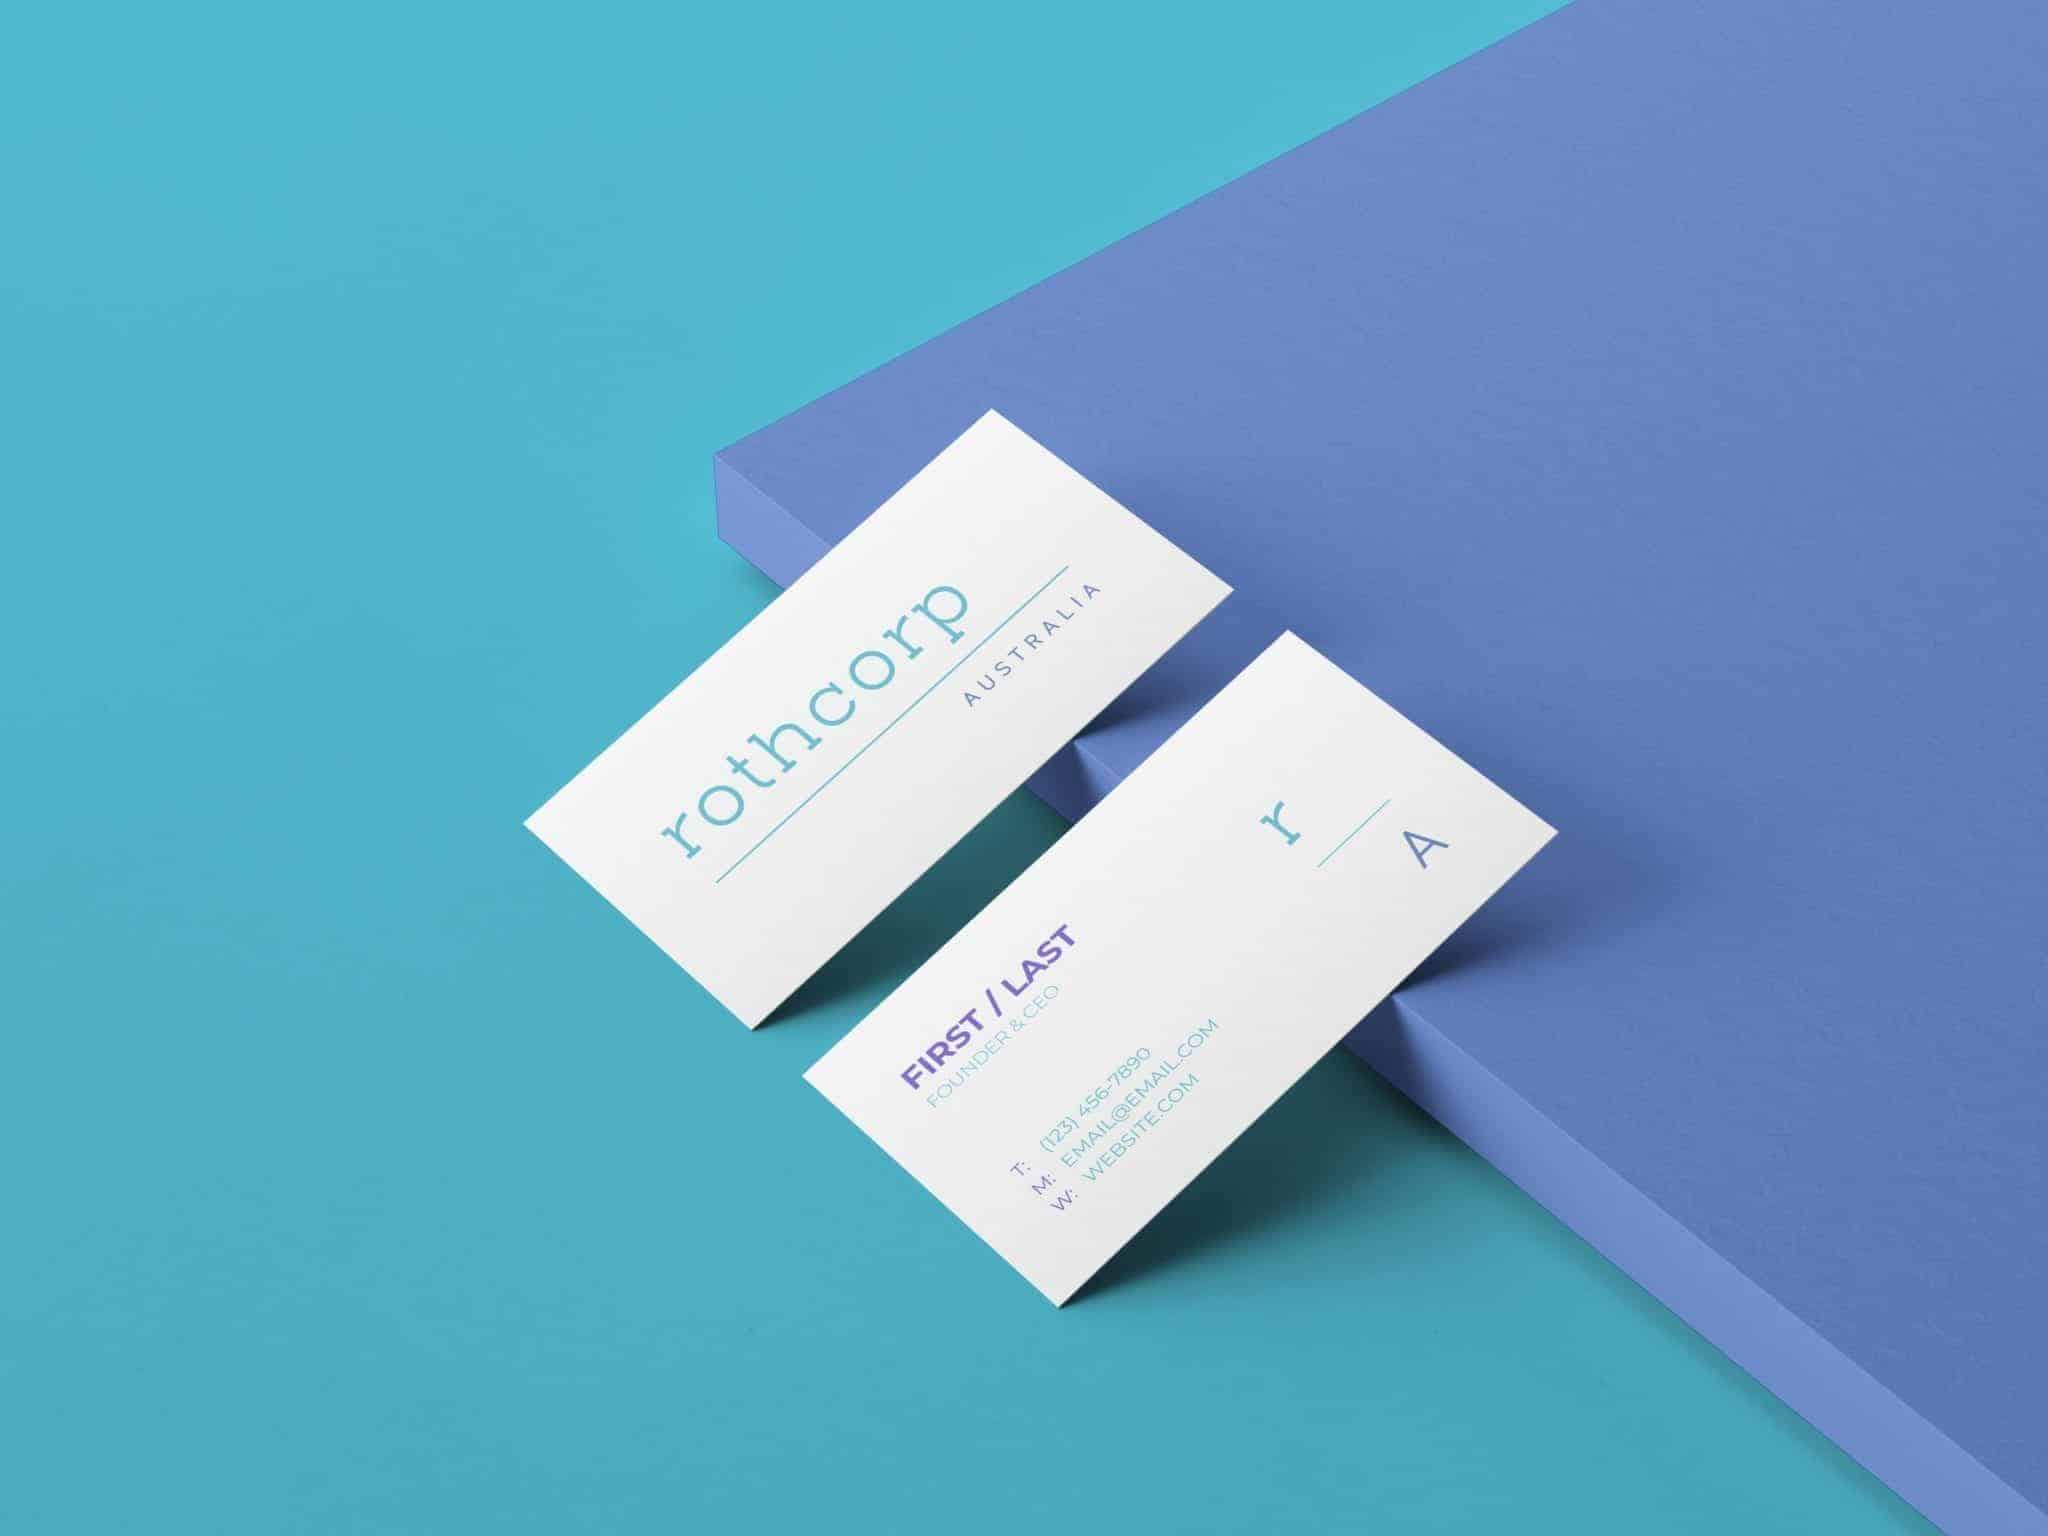 Two business cards on a blue surface with Brand Design in Australia.